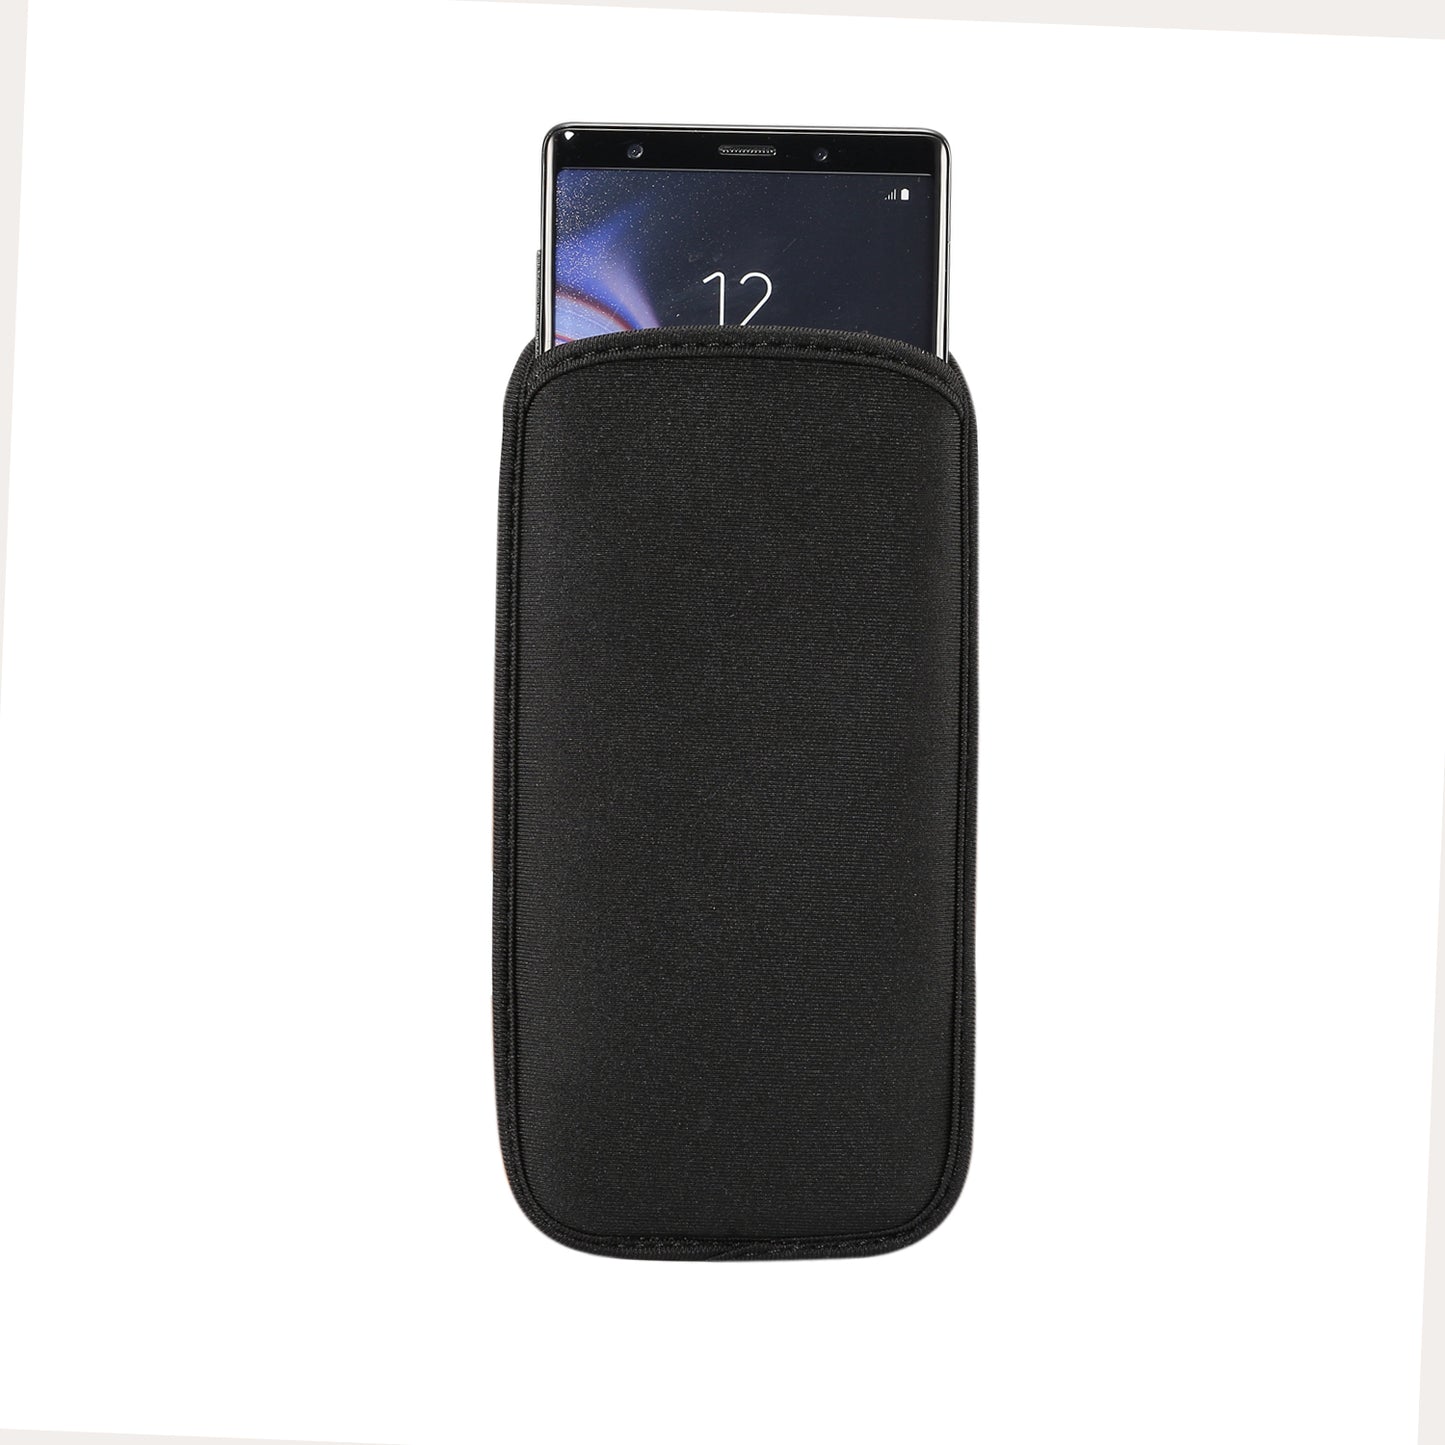 Neoprene Universal Phone Pouch Case for 6.7-6.9 inch Mobile Phones